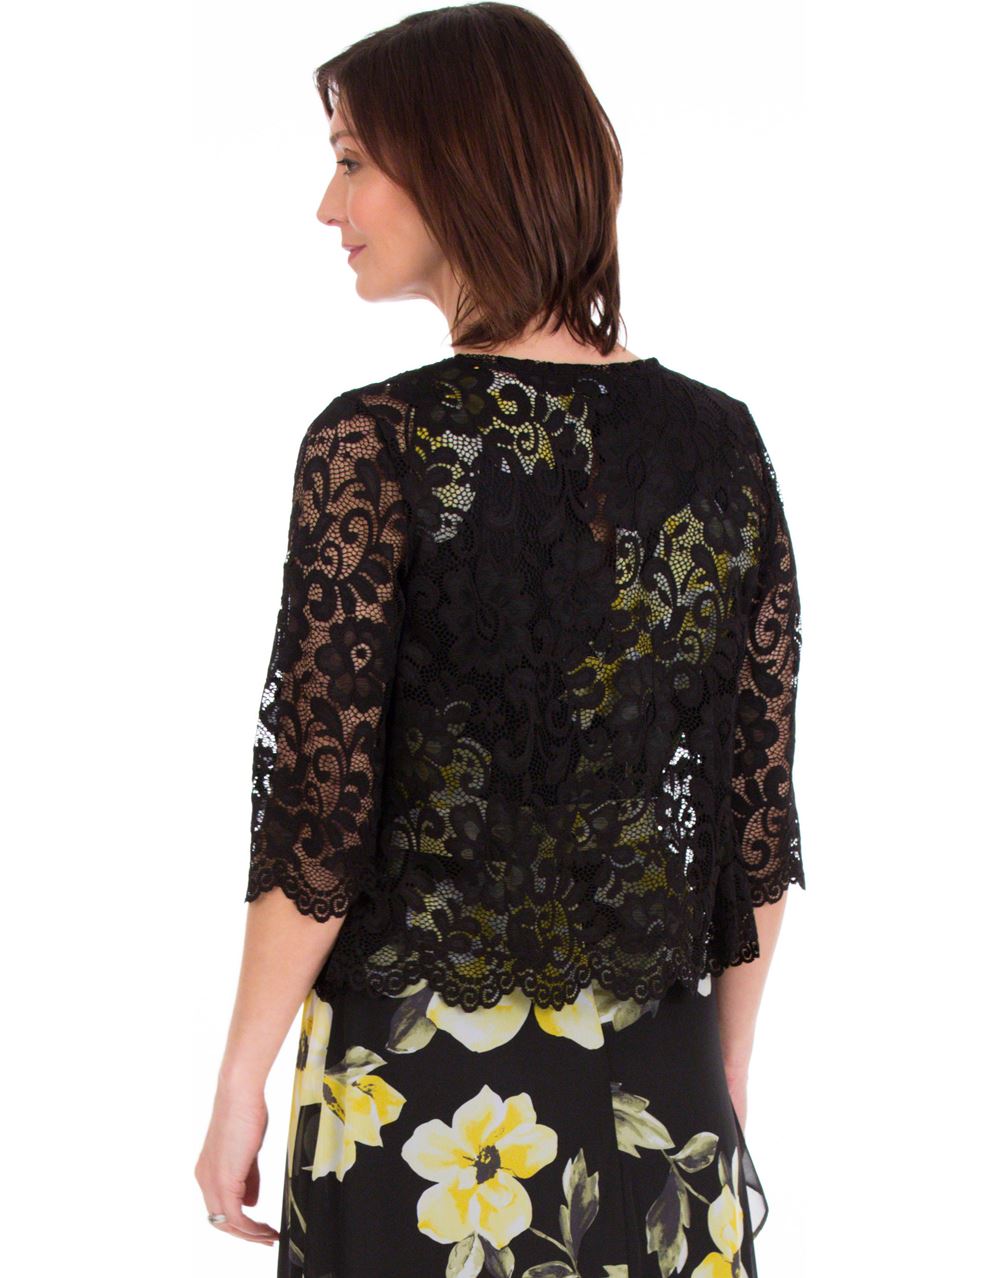 Lace Cover Up